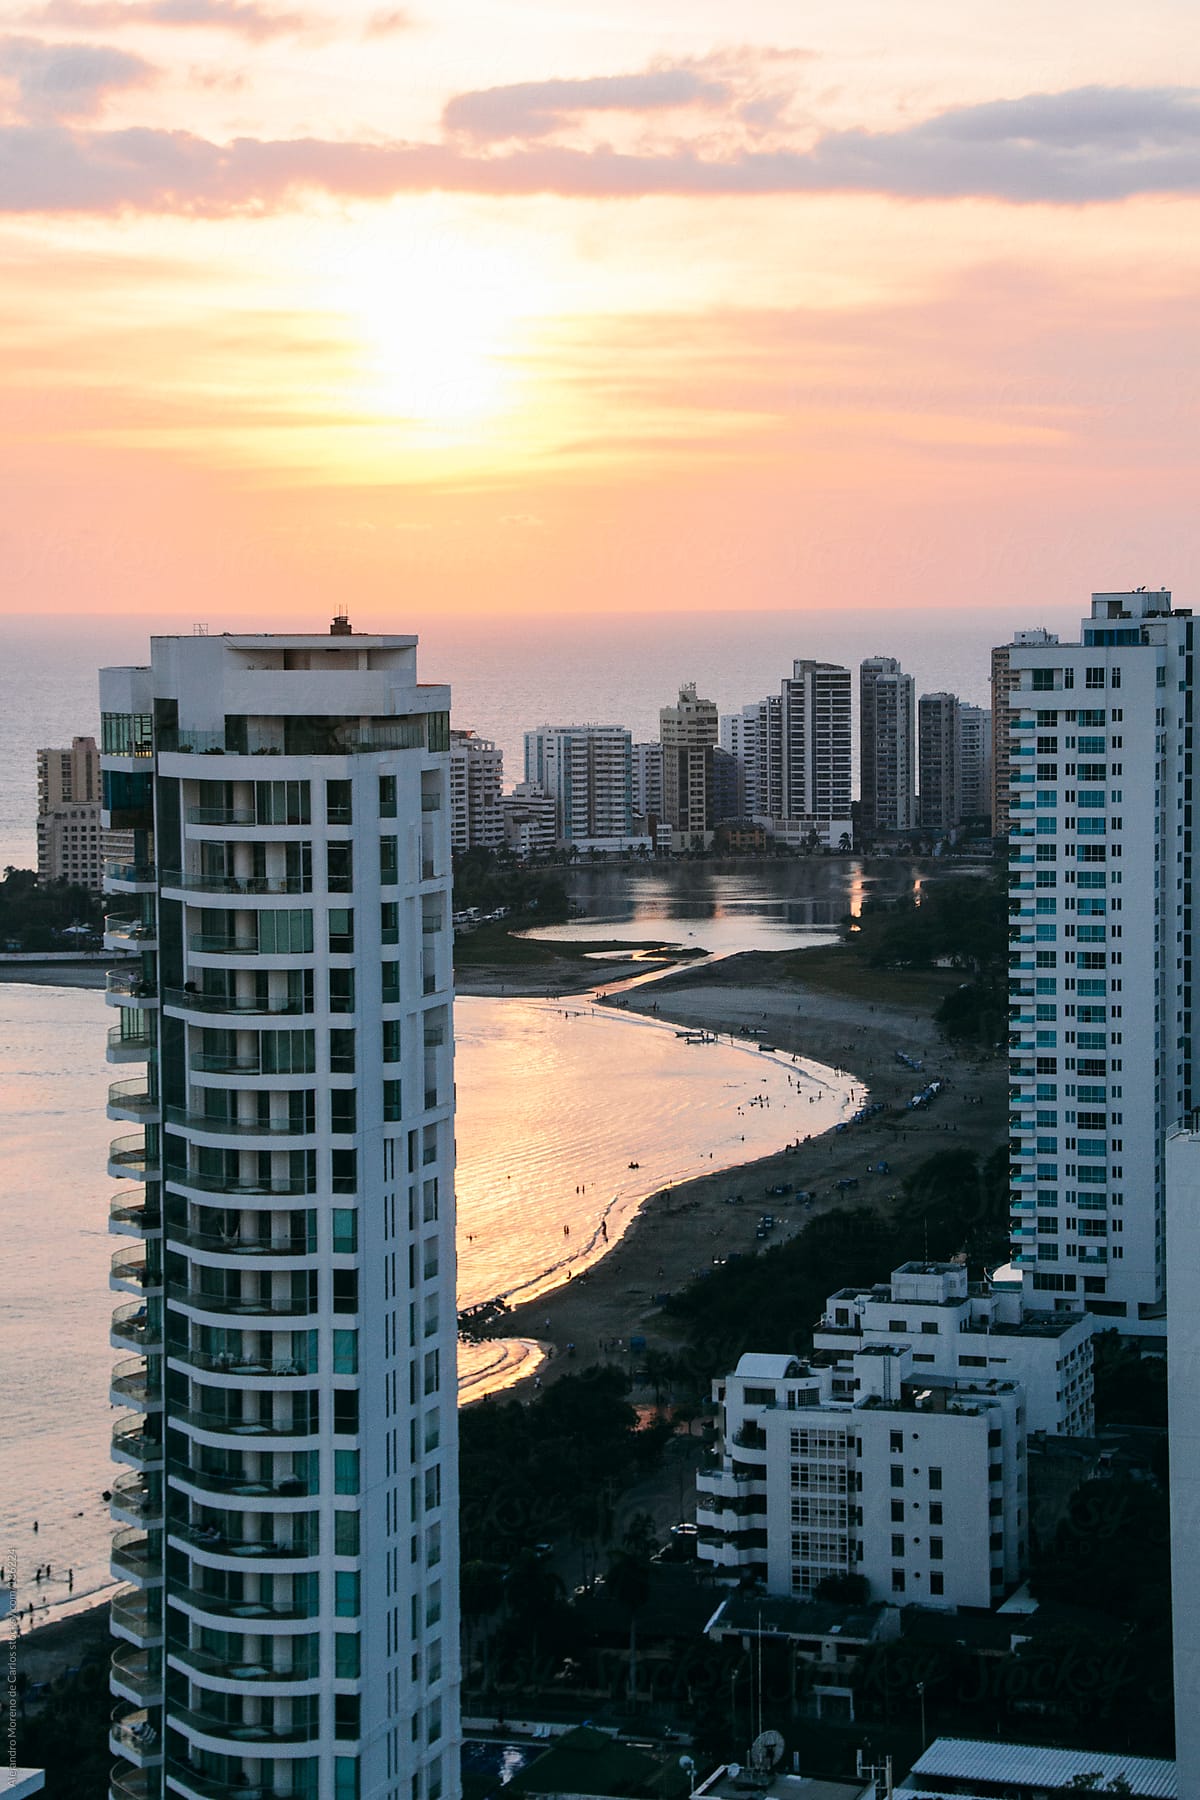 Sunset at the beach with white apartments - buildings on the foreground. Cartagena de Indias, Colombia